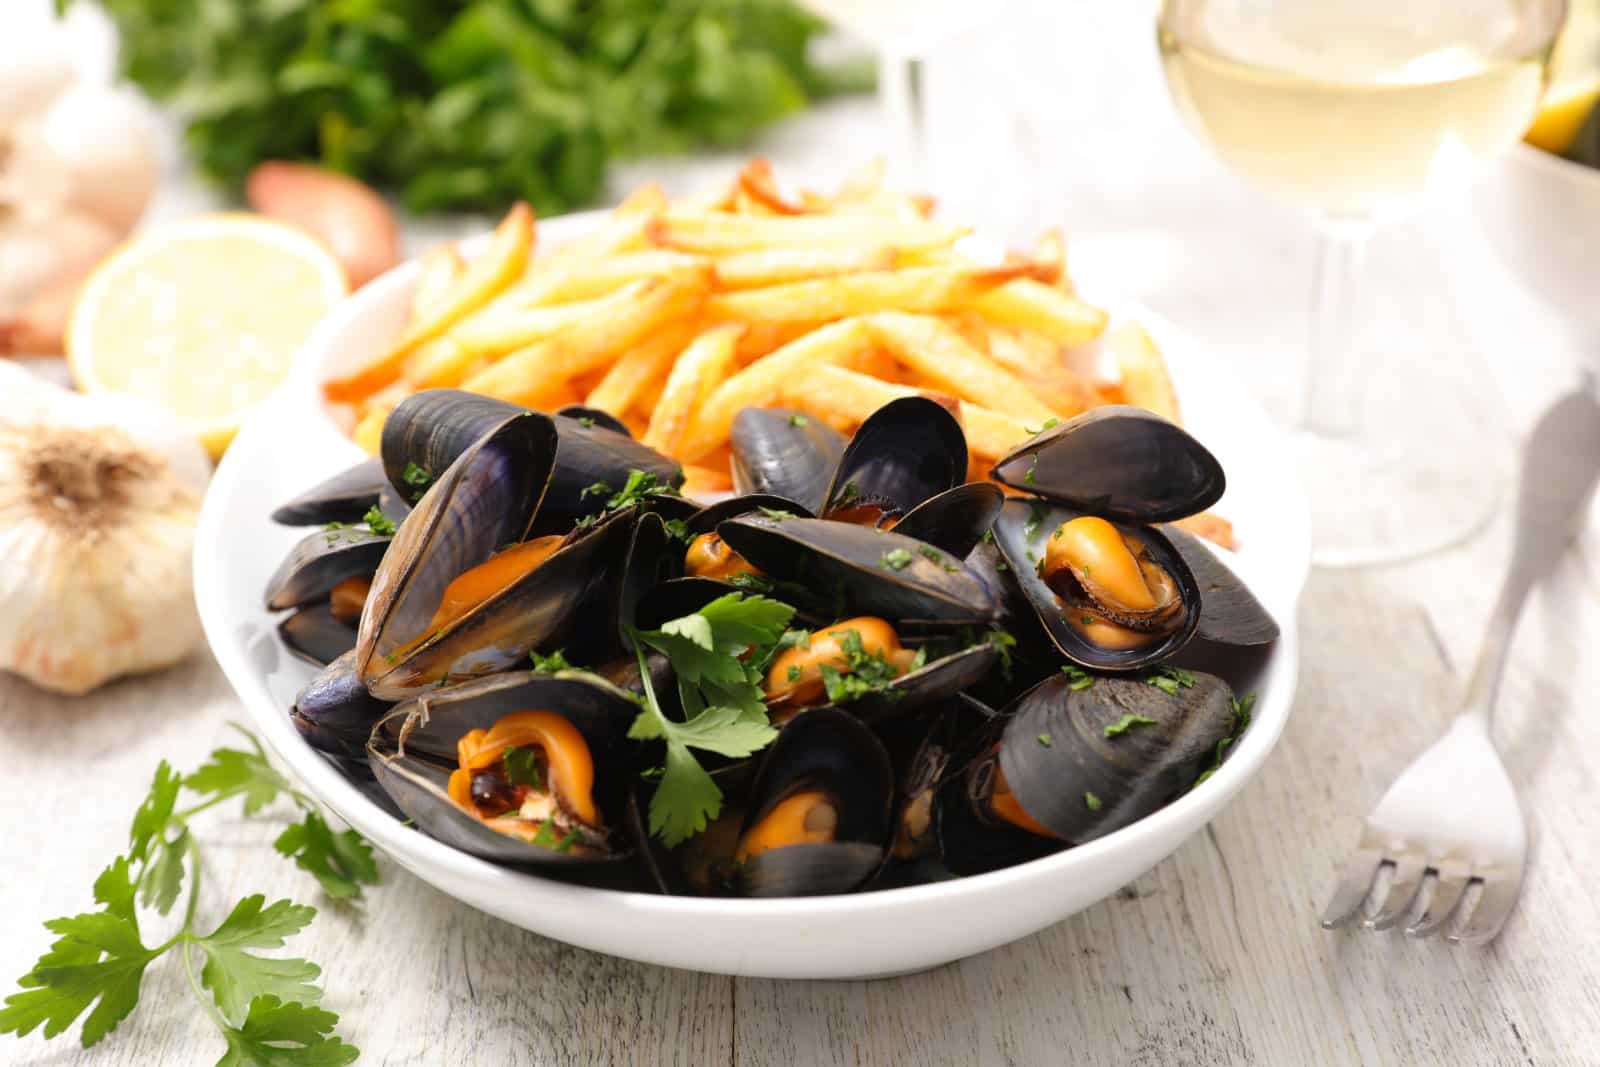 Image Credit: Shutterstock / margouillat photo <p>Steamed mussels served with a side of crispy fries, a simple yet delicious Belgian specialty.</p>